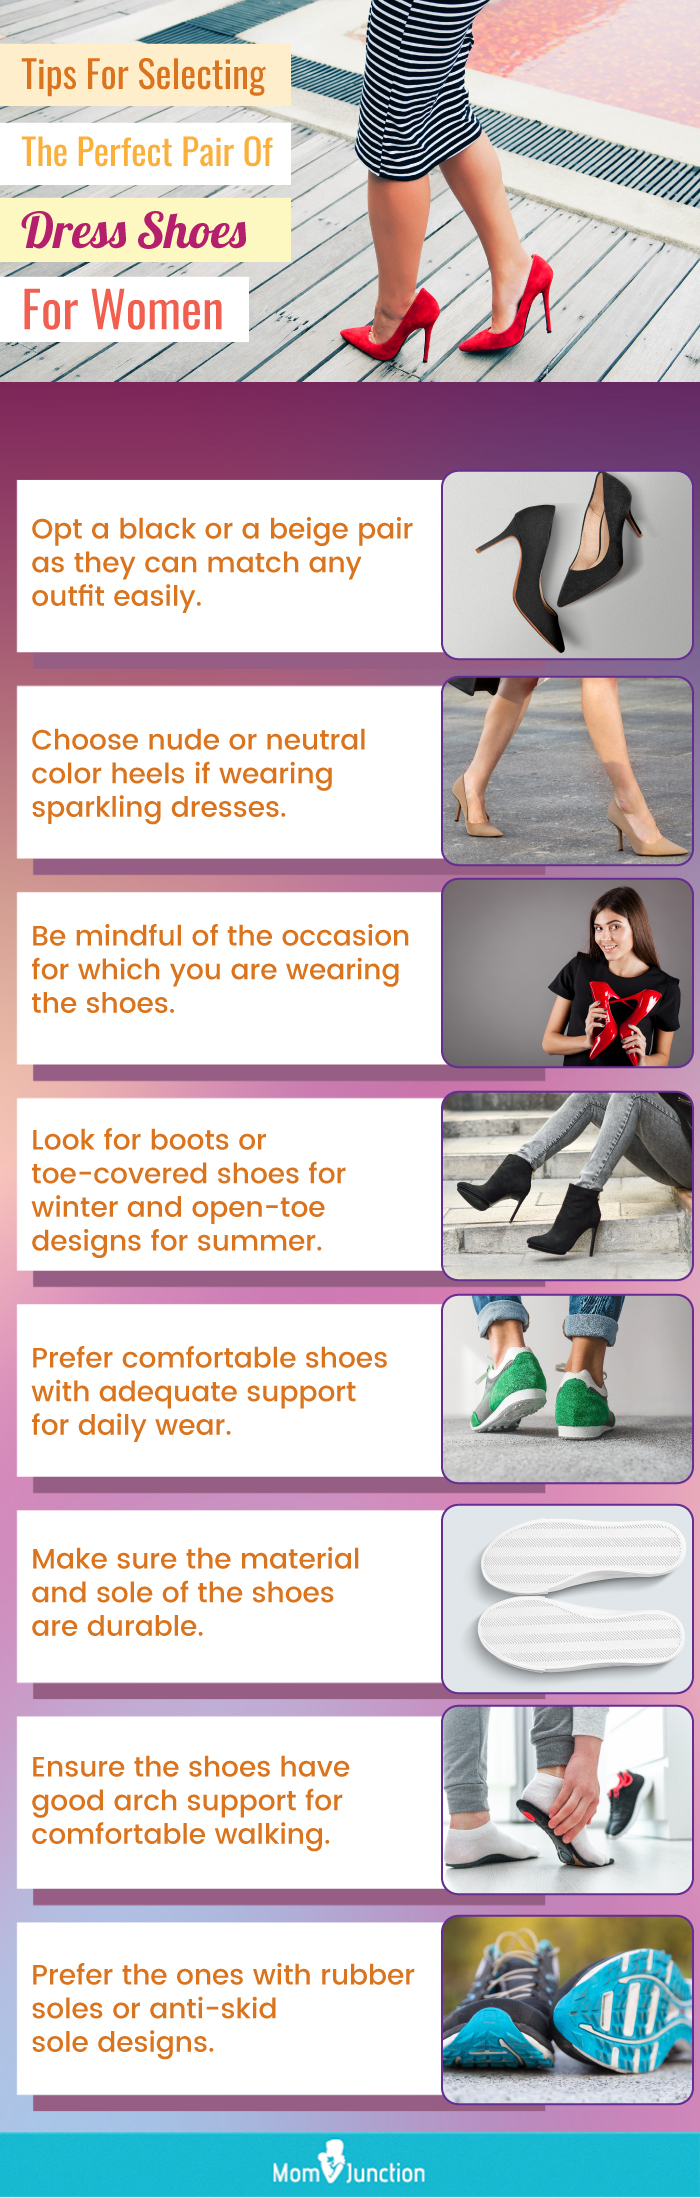 Tips For Selecting the Perfect Pair Of Dress Shoes For Women (infographic)